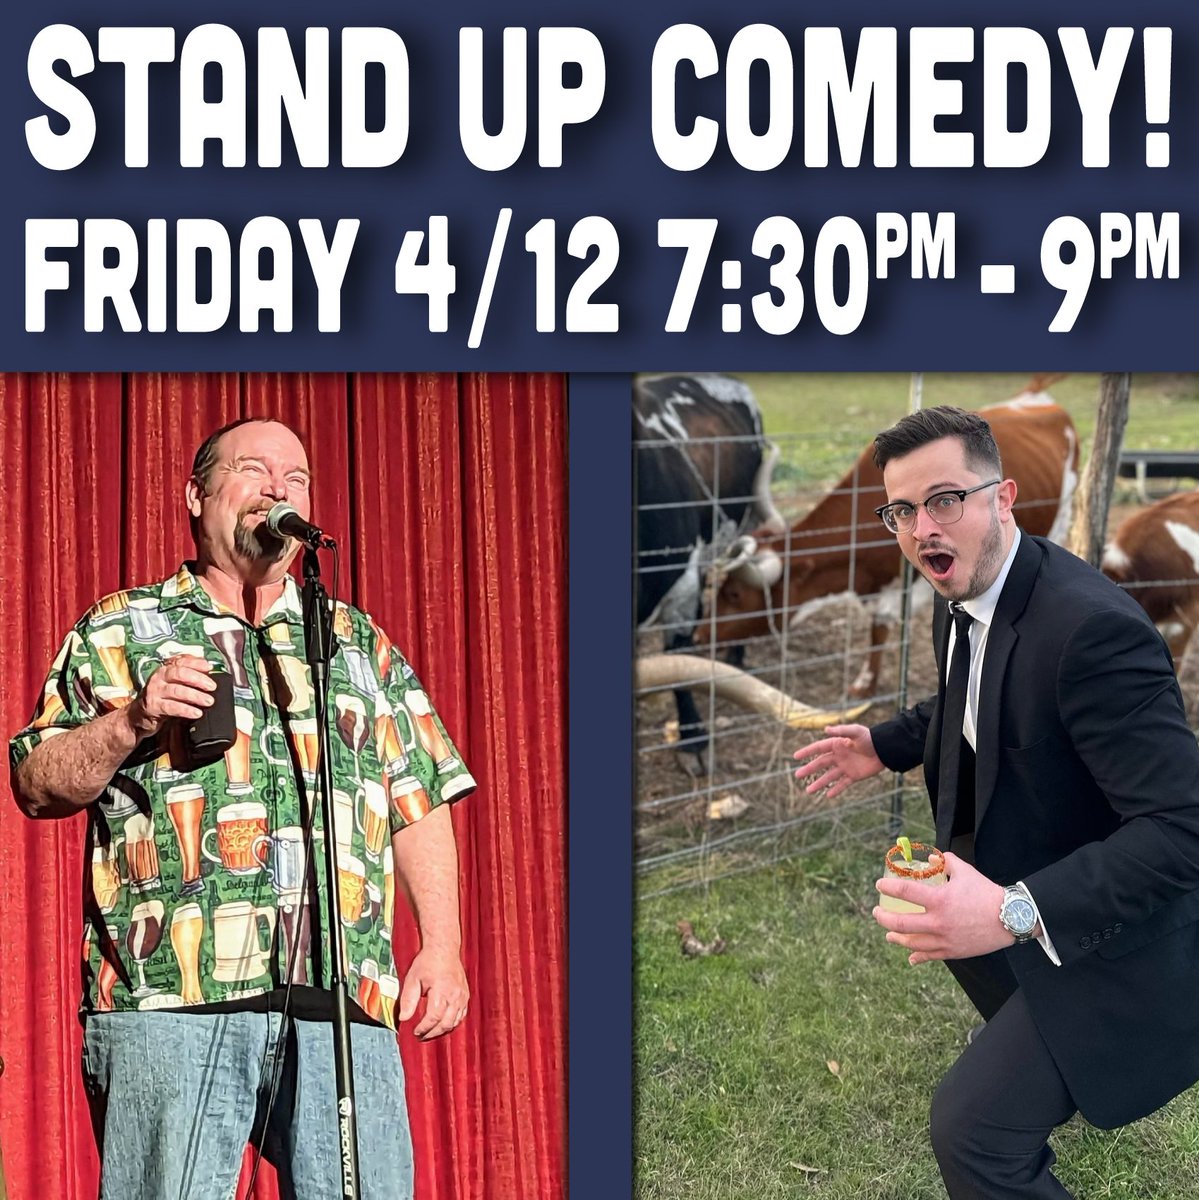 Grab your tickets for tomorrow's Stand Up Comedy show in Green Bay! Check out the link for more info on Mike & Brandon and for tickets too! Up close and personal show, hosted in our event room! ahnapeebrewery.com/product/mike-b… #wibeer #standupcomedy